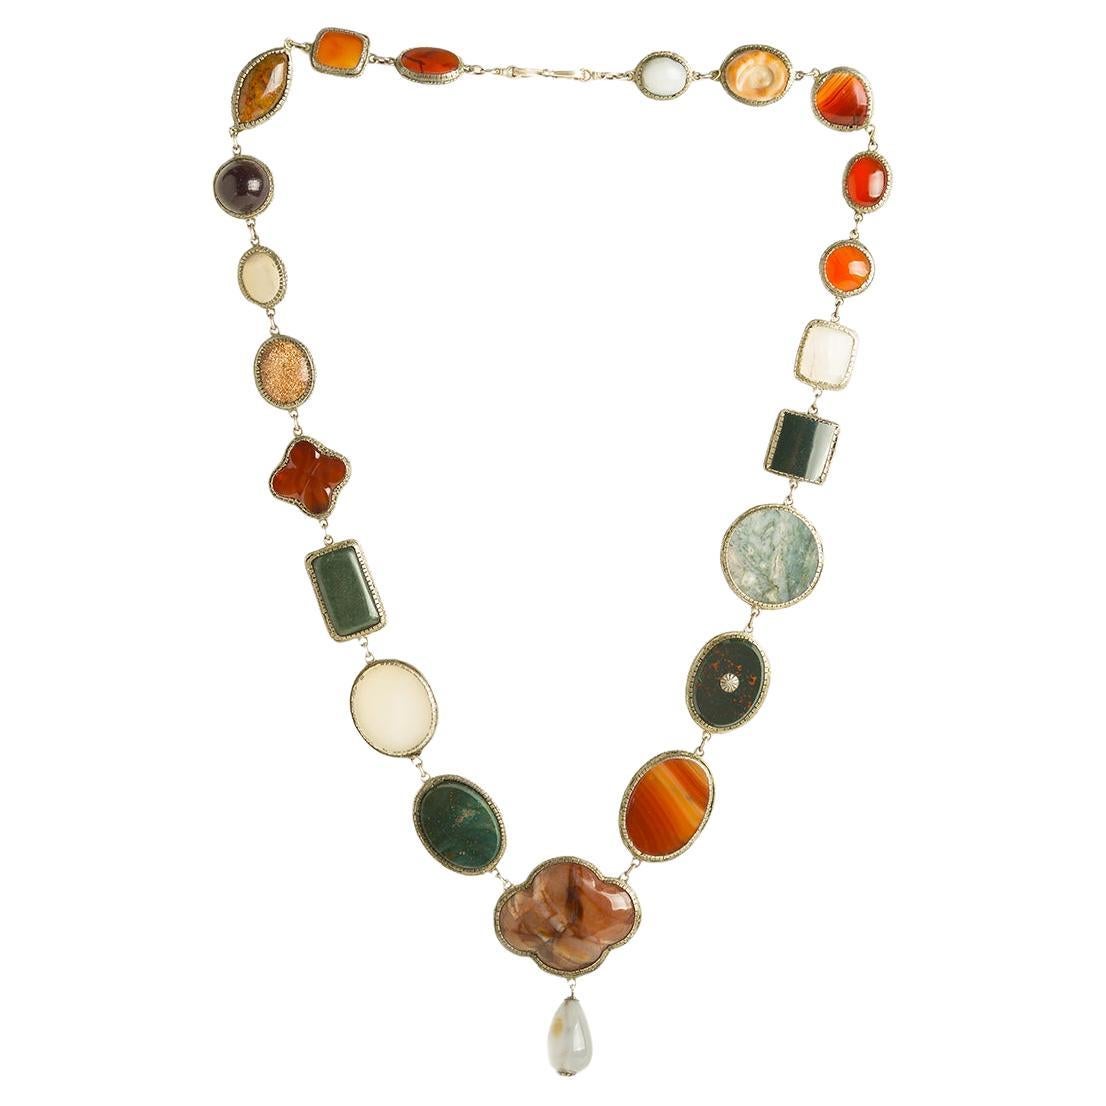 1820s 925 Silver Necklace with Agate and Semiprecious Stones